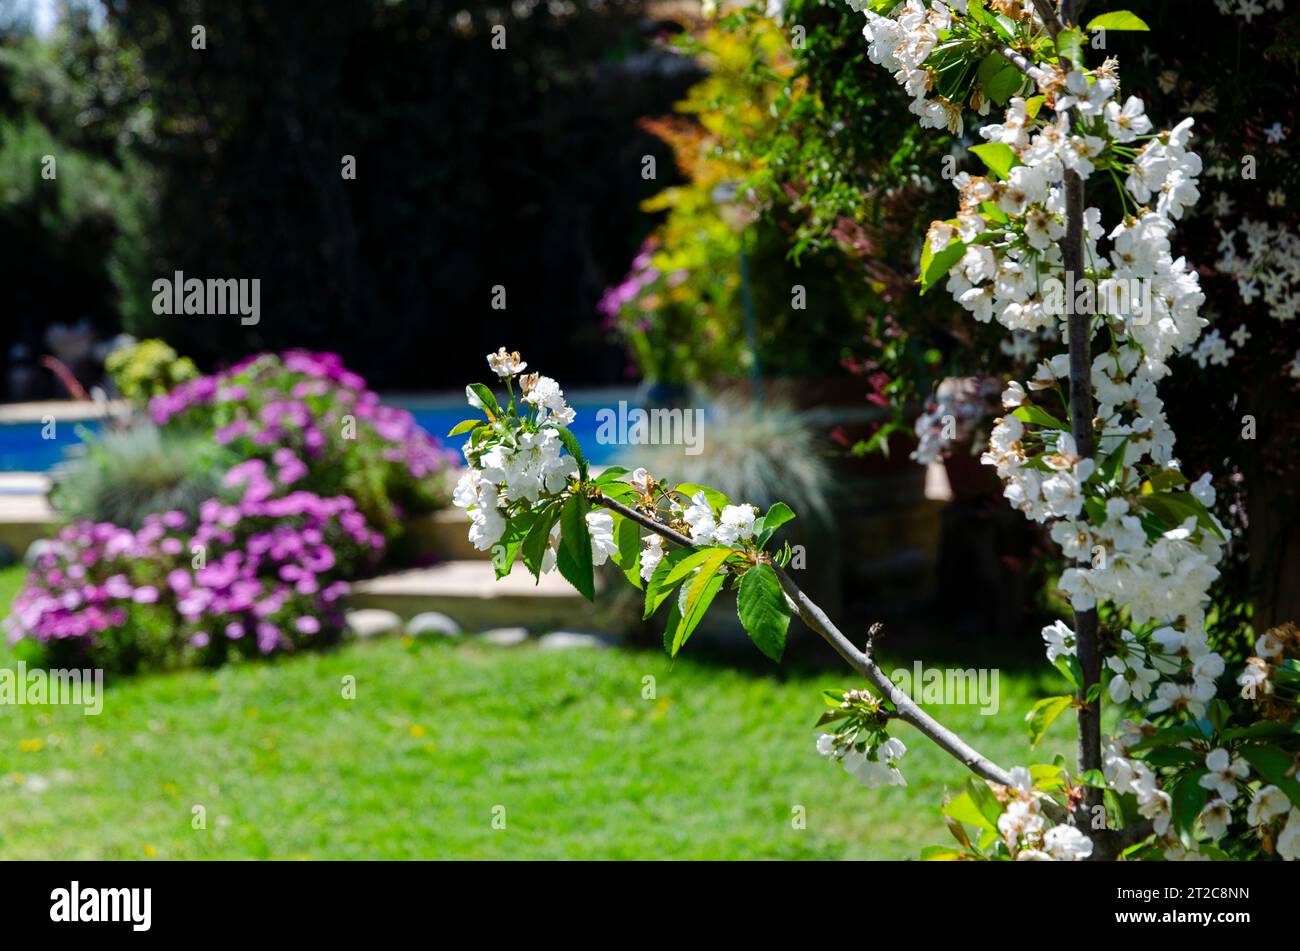 Flowers and plants in a garden at the countryside of El Olivar, Rancagua, Chile Stock Photo